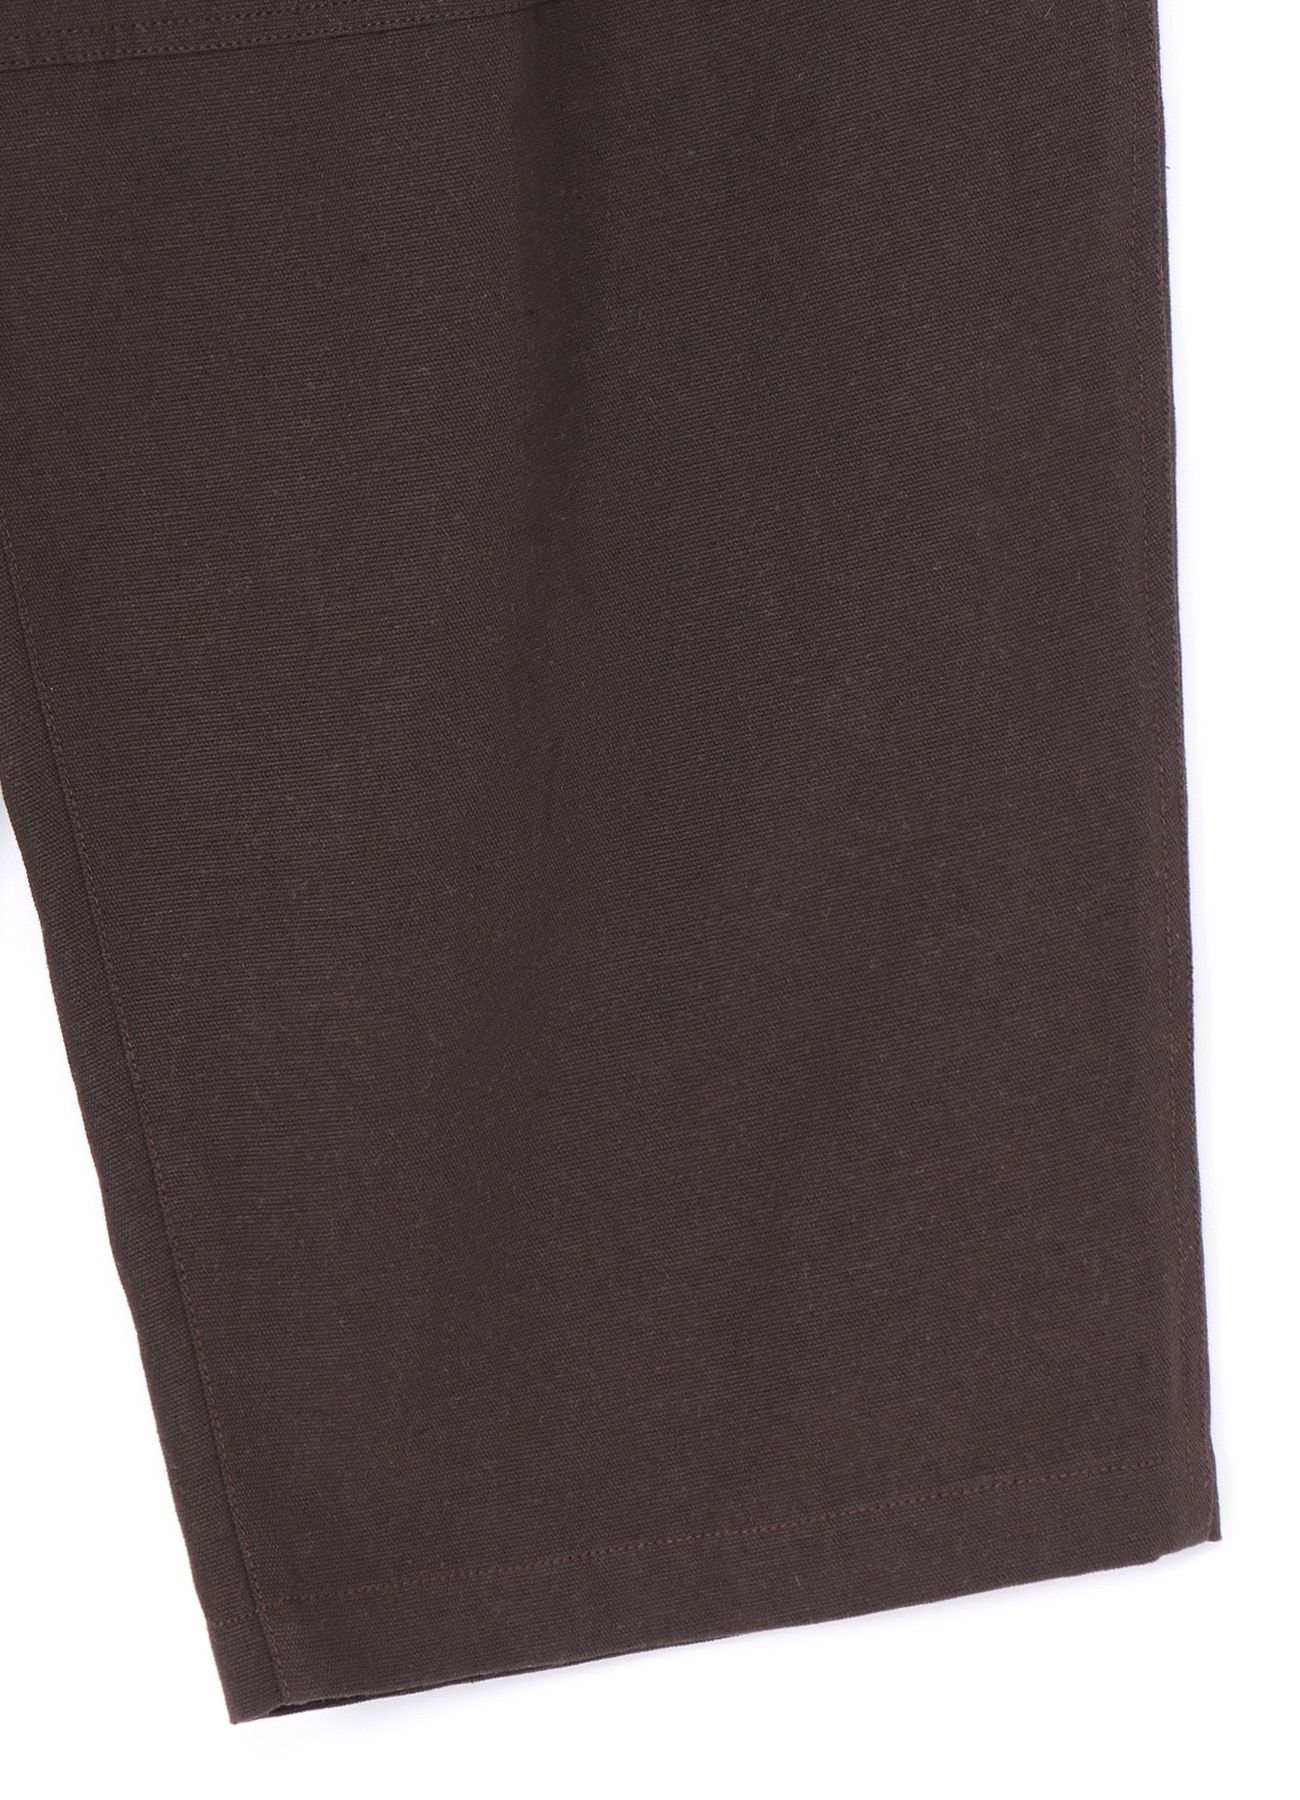 ZW COLLECTION WOOL BLEND MINIMALIST PLEATED PANTS - Dark brown